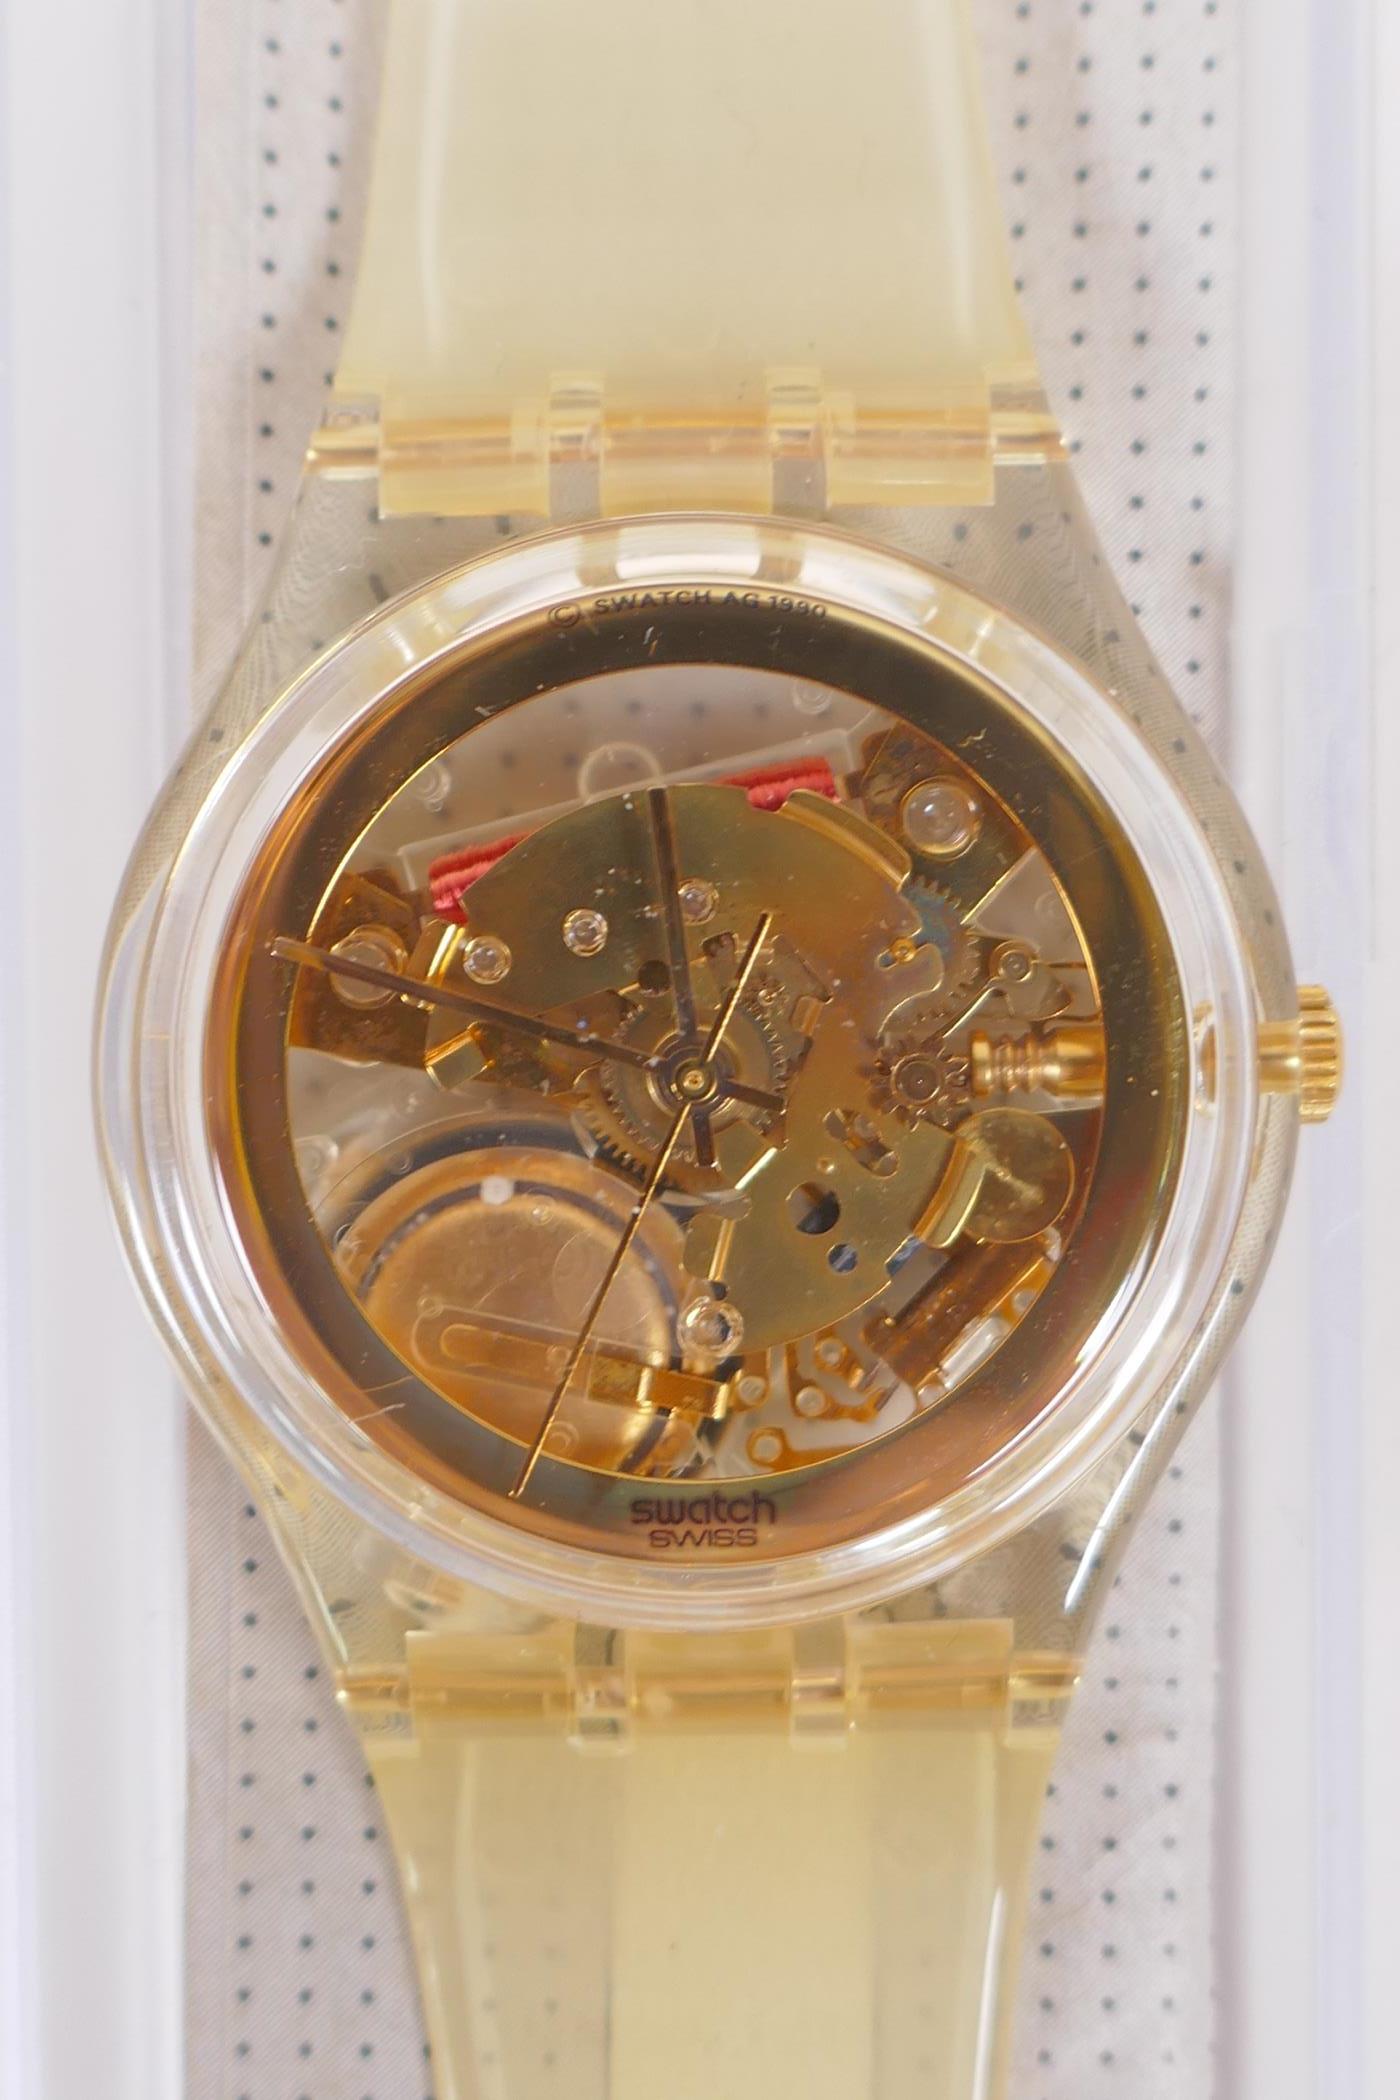 A collection of Retro Swatch watches including The Swatch Collectors of Swatch Golden Jelly 1991, - Image 7 of 12